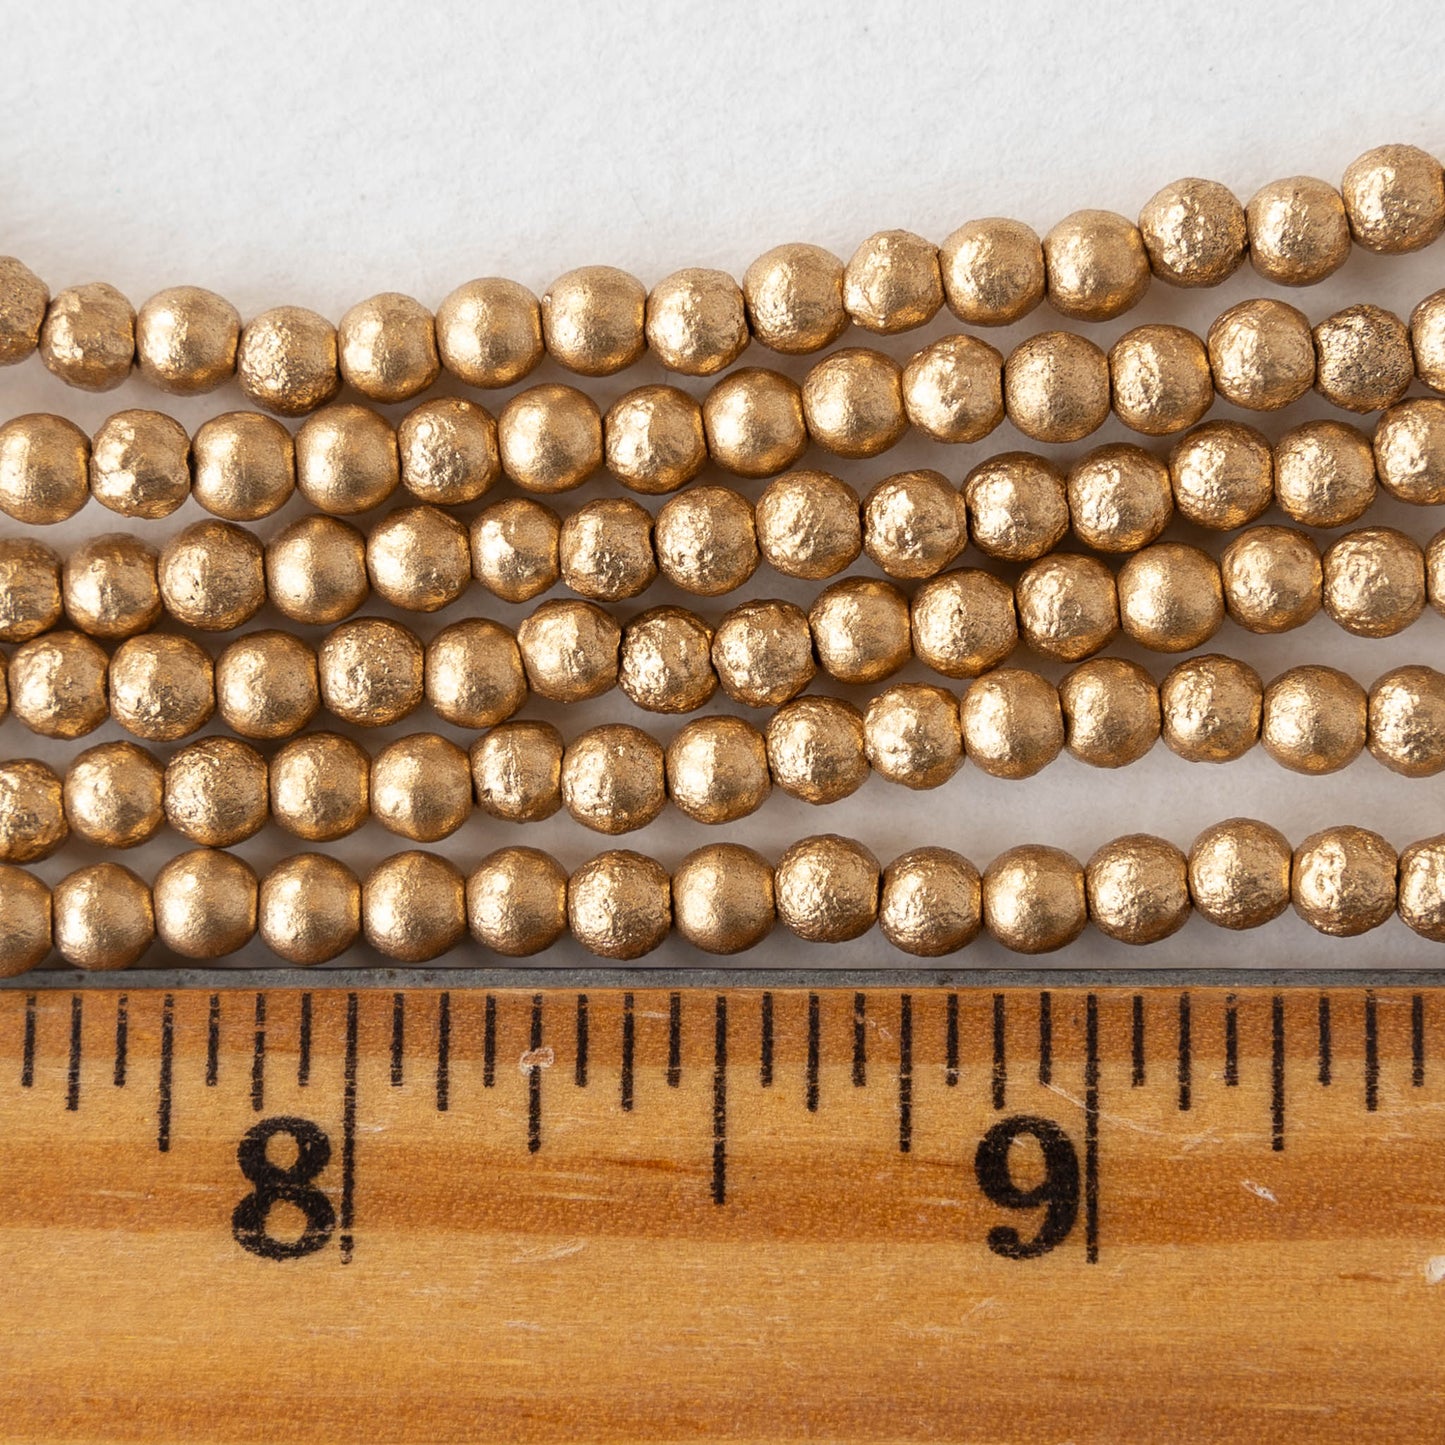 4mm Round Glass Beads - Etched Aztec Gold Matte - 50 Beads